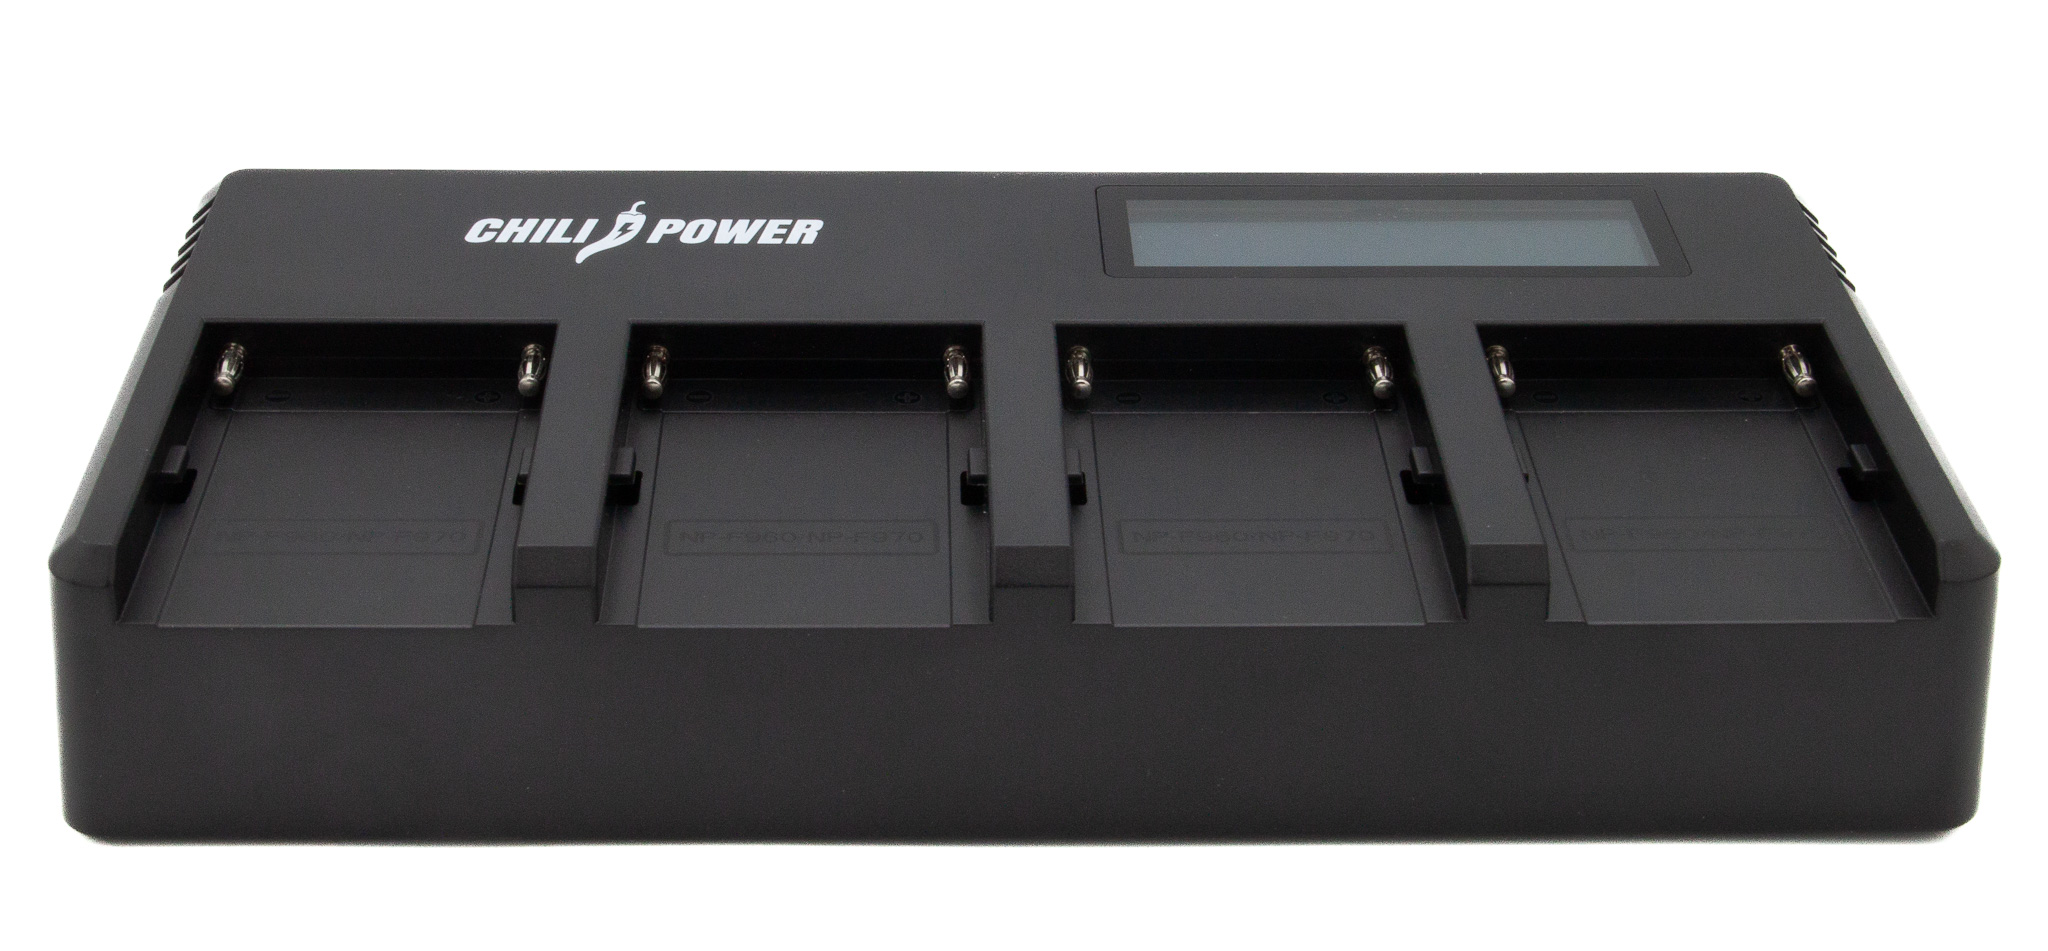 Patona ChiliPower Snellader voor 4 Sony L-serie accu's (NP-F550, NP-F570, NP-F750, NP-F960, NP-F970)